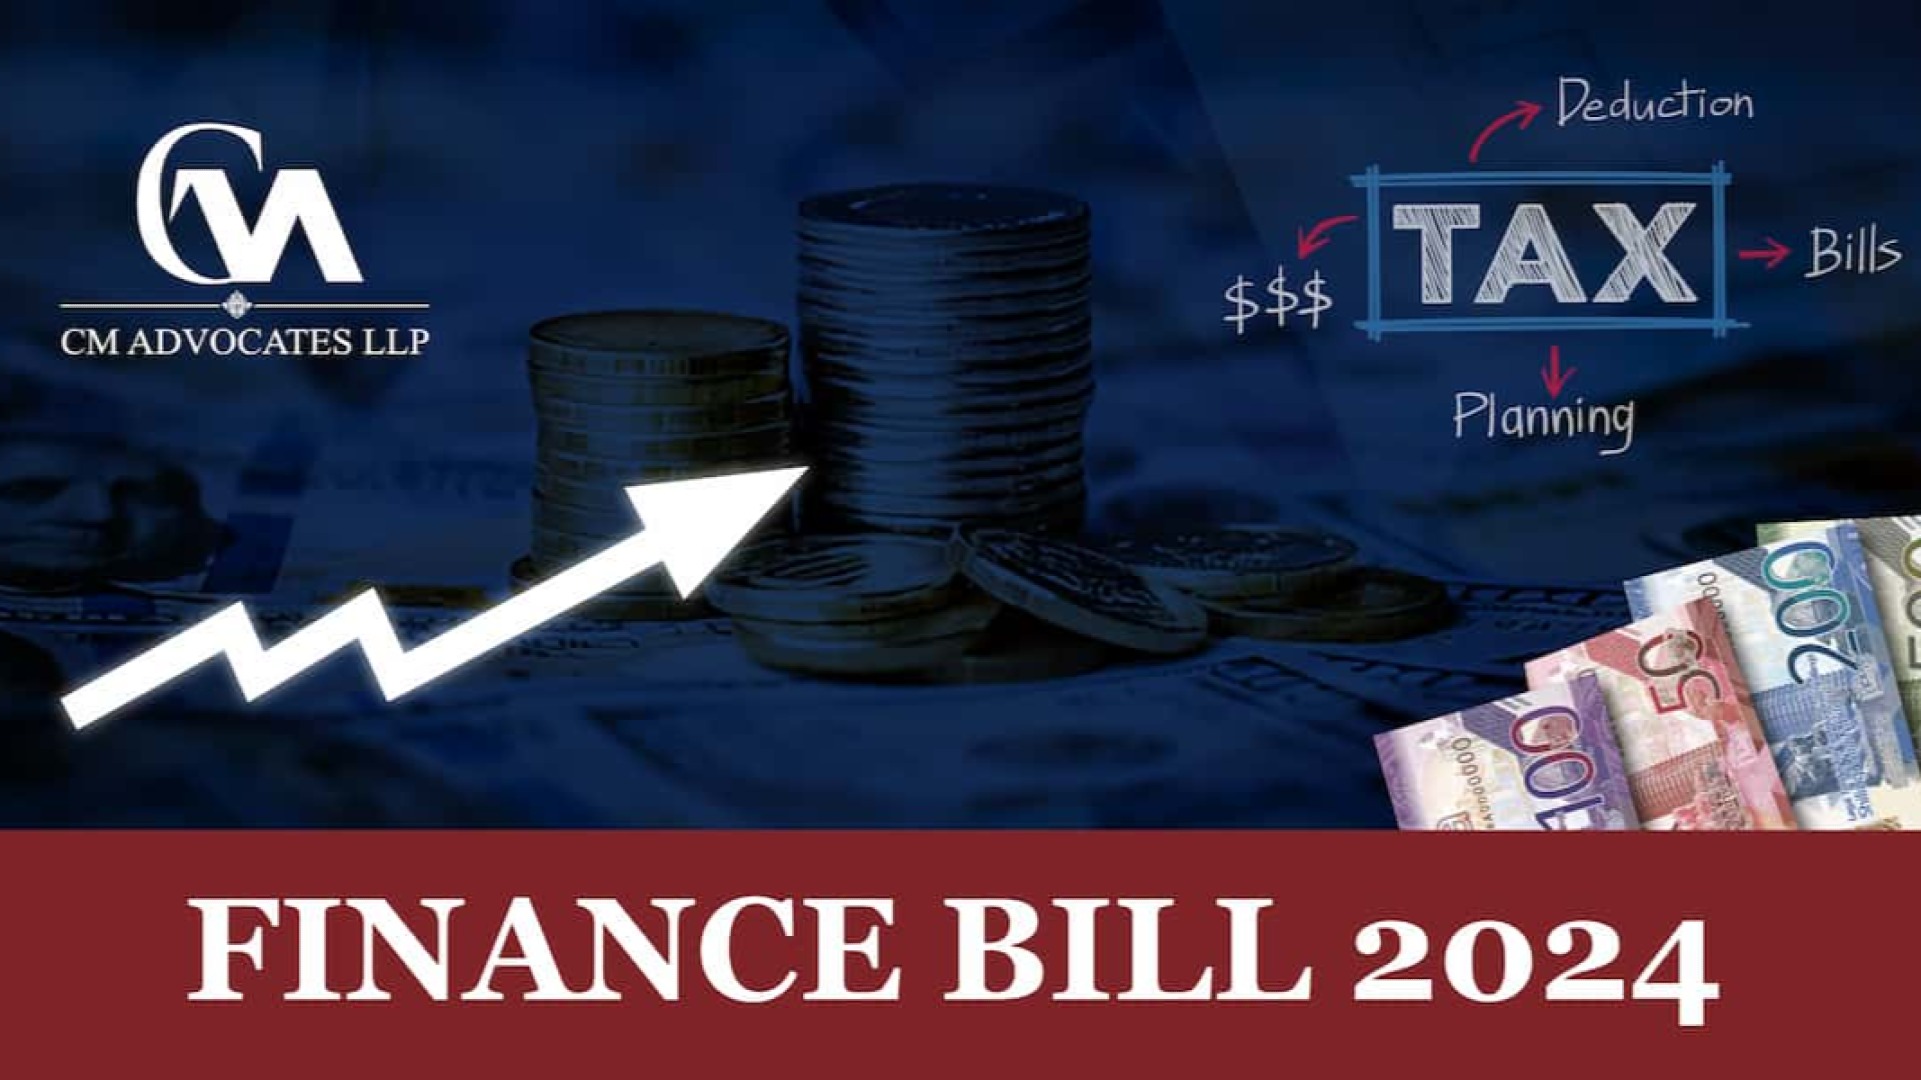 Key changes proposed by the Finance Bill, 2024 